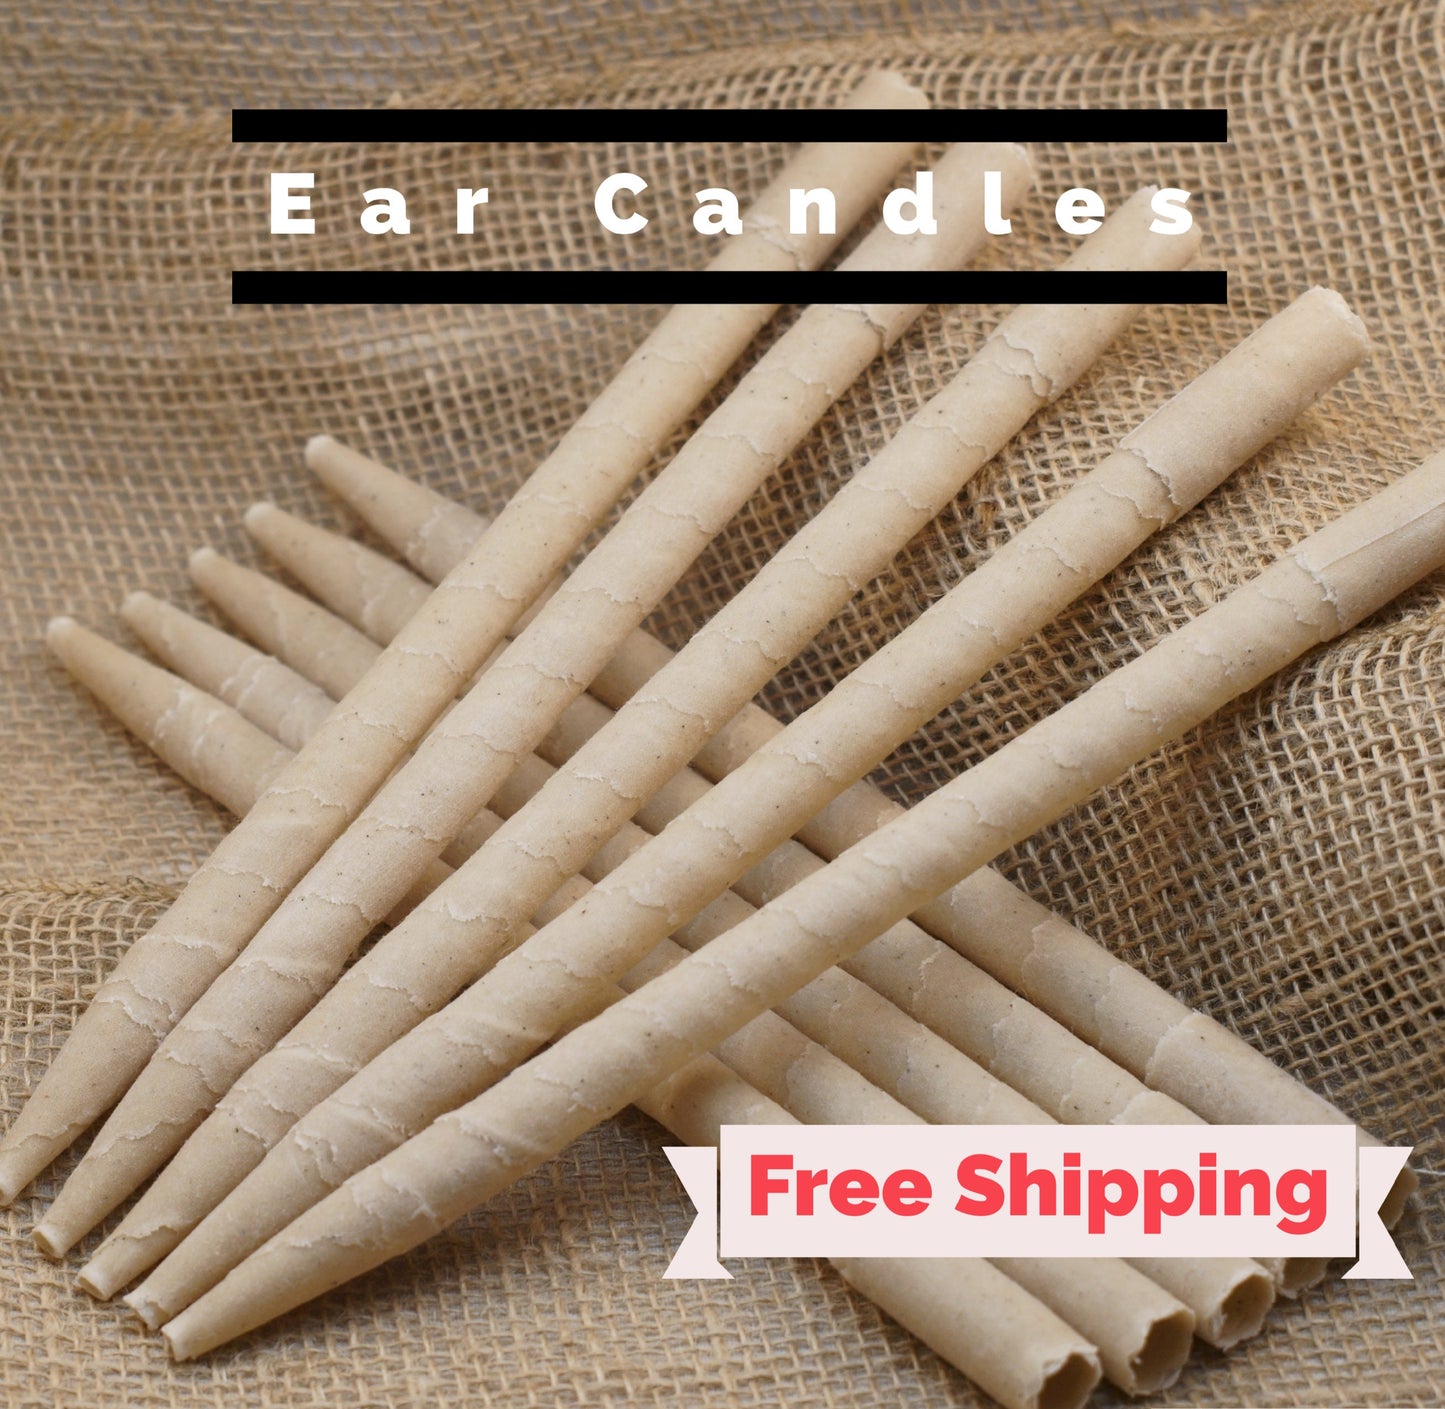 Ear Candles 10pk - Paraffin Wax Cones Cylinders for Ear Candling - Made in the USA